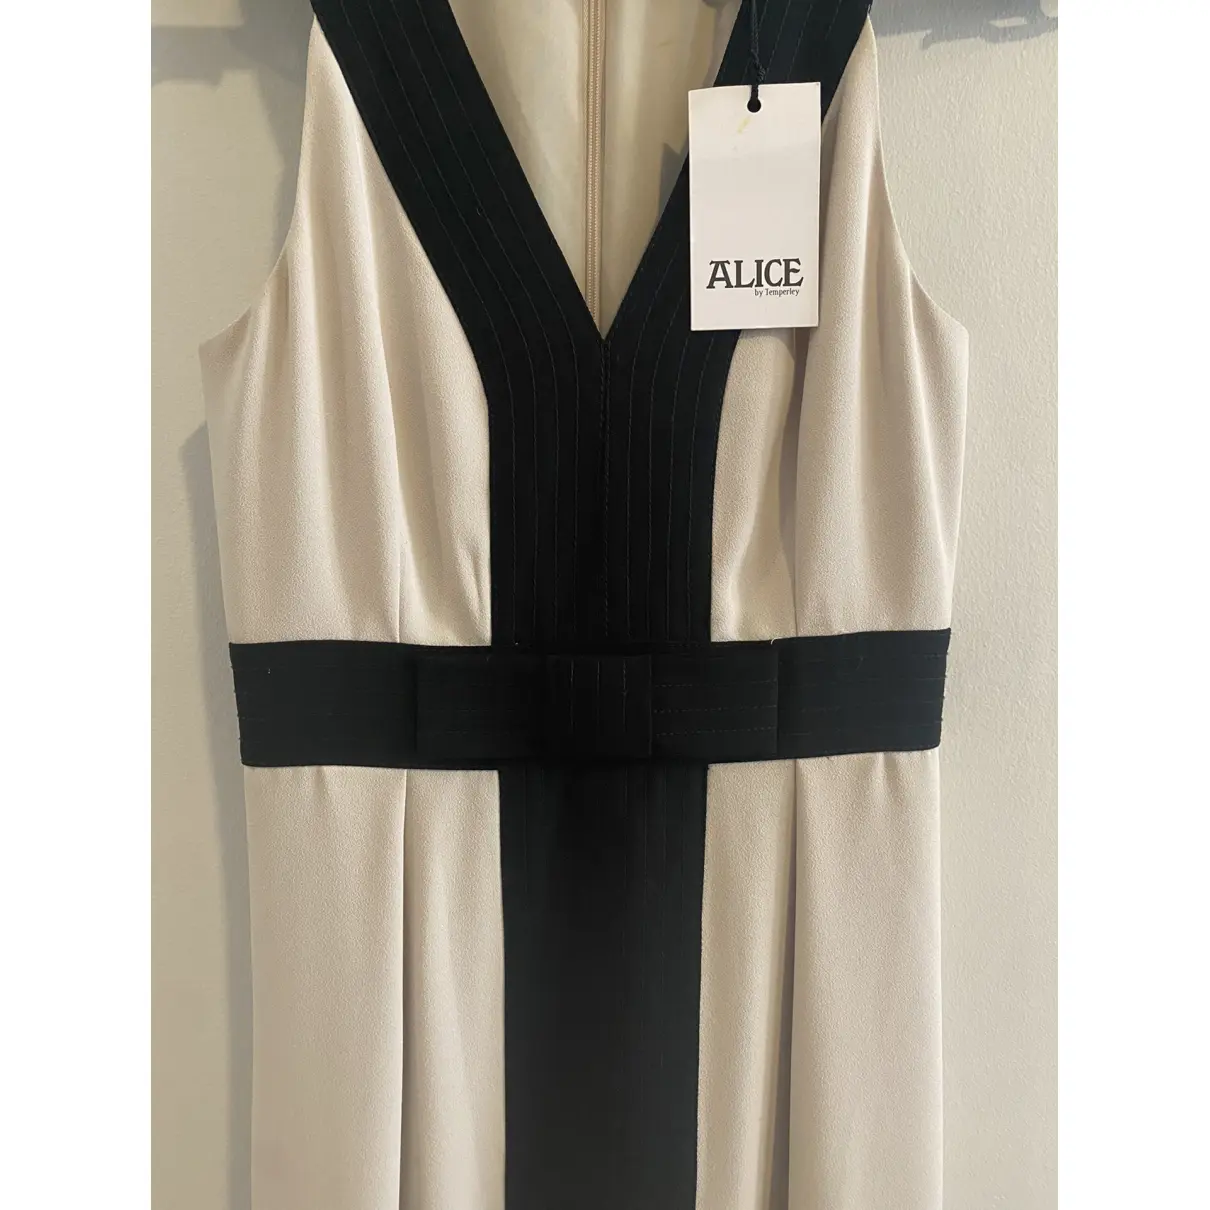 Maxi dress Alice by Temperley